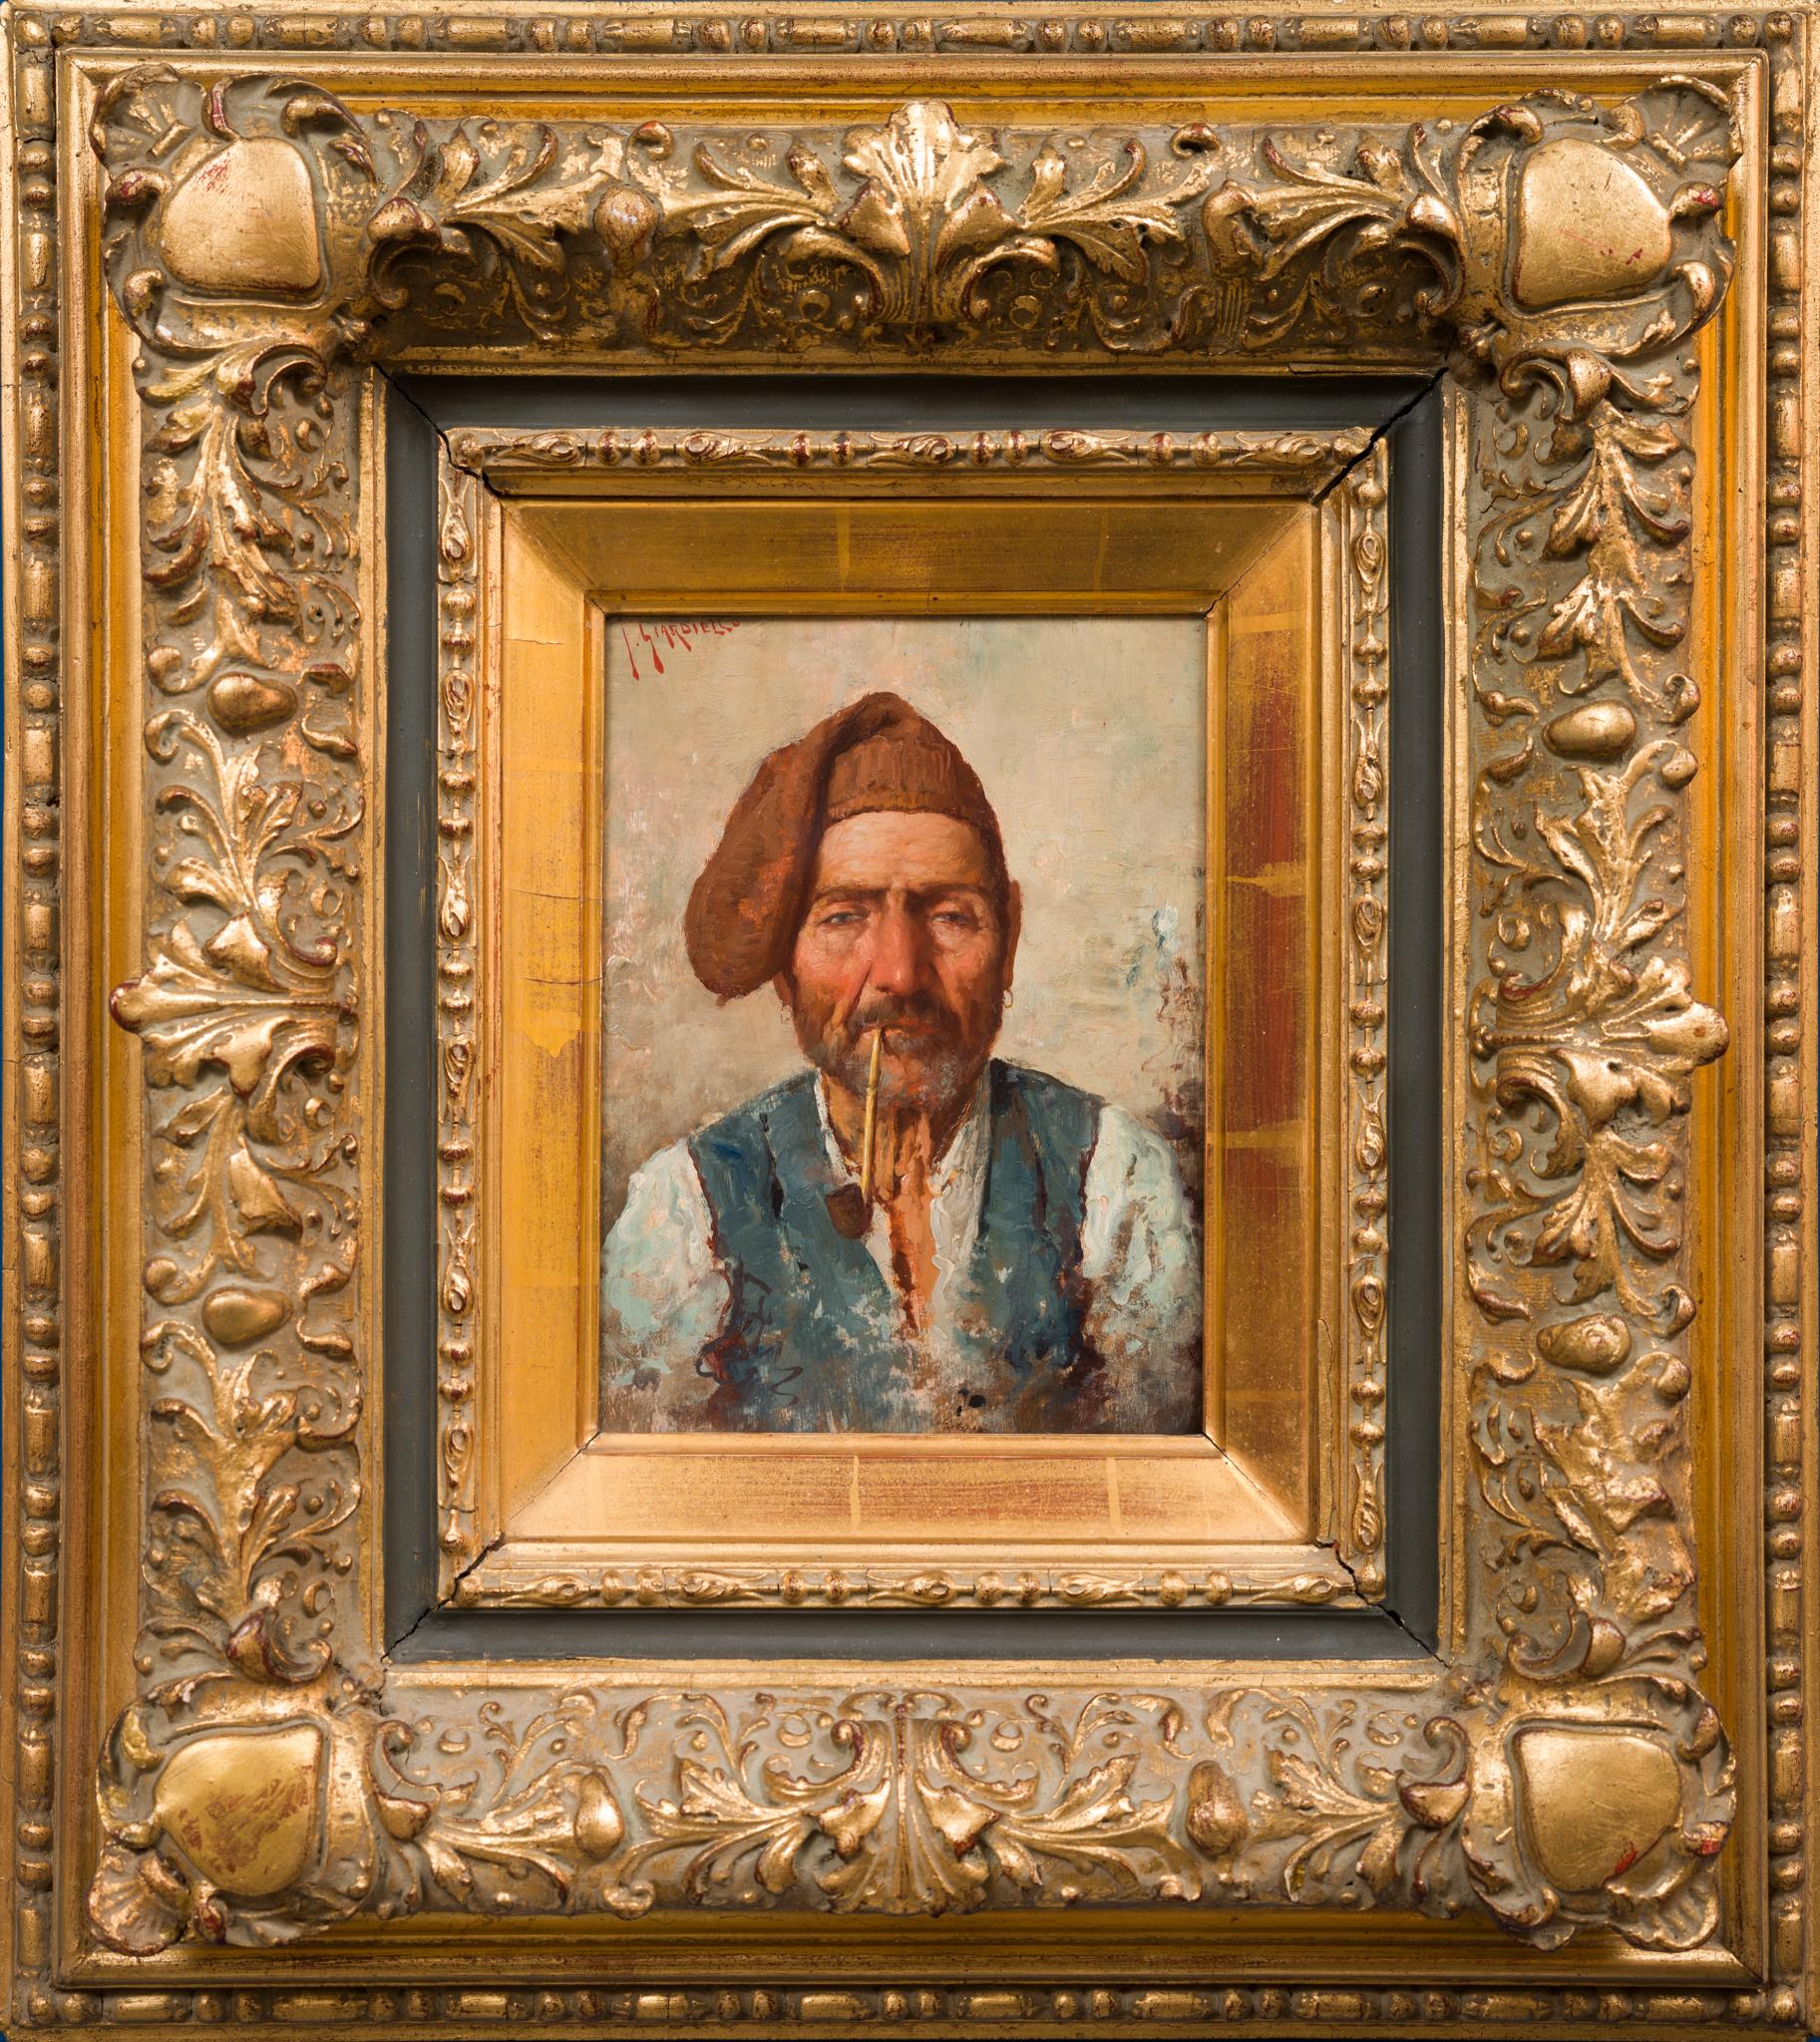 This captivating small portrait is the work of Italian artist Giuseppe Giardinello, who lived from 1887 to 1920. Giardinello's talent for capturing the essence of his subjects is fully on display in this piece, where every brushstroke tells a story